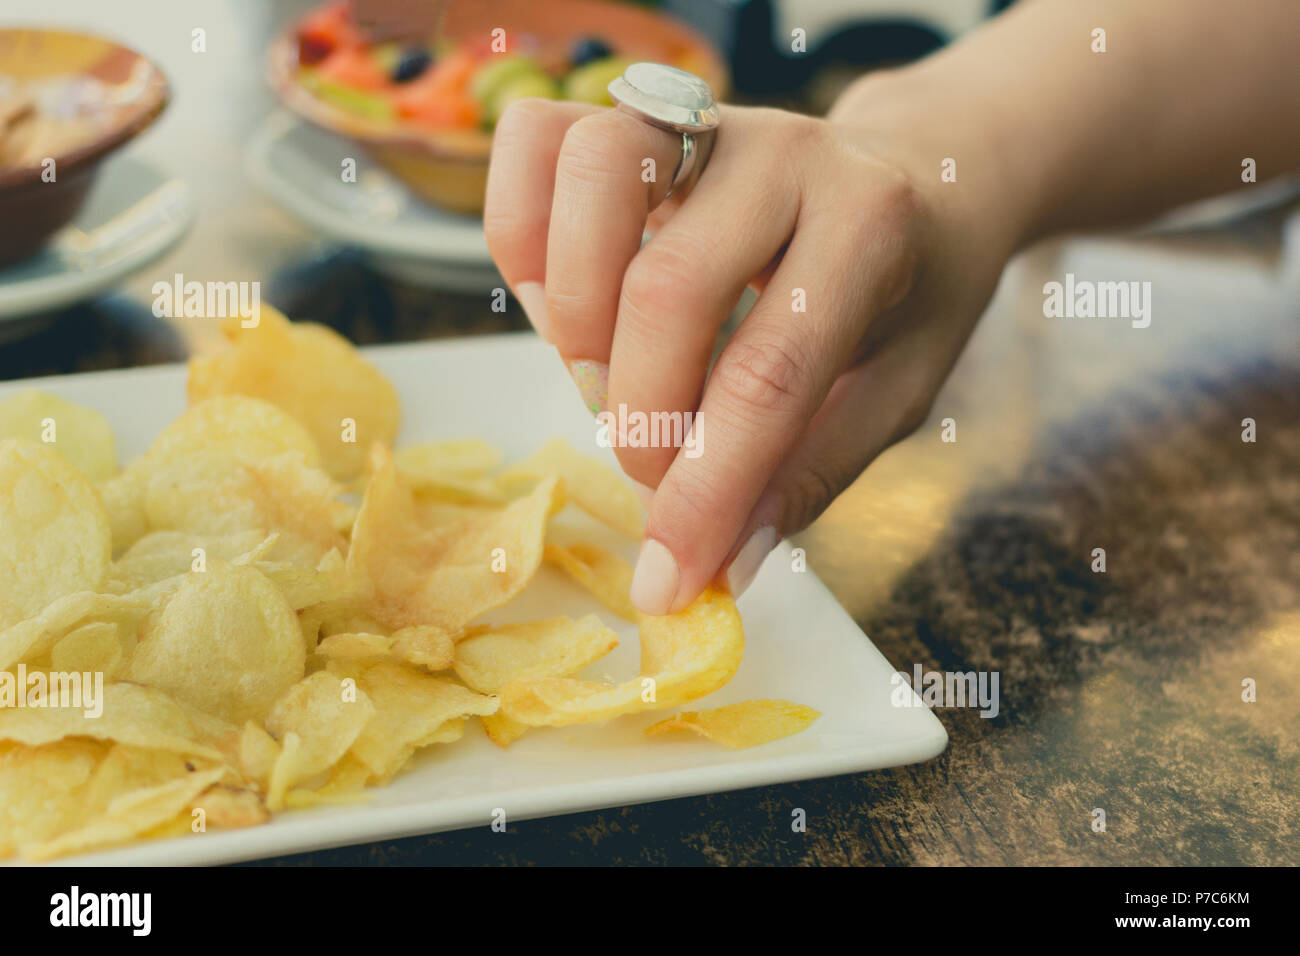 Hands of a woman picking a fried potato during a snack Stock Photo